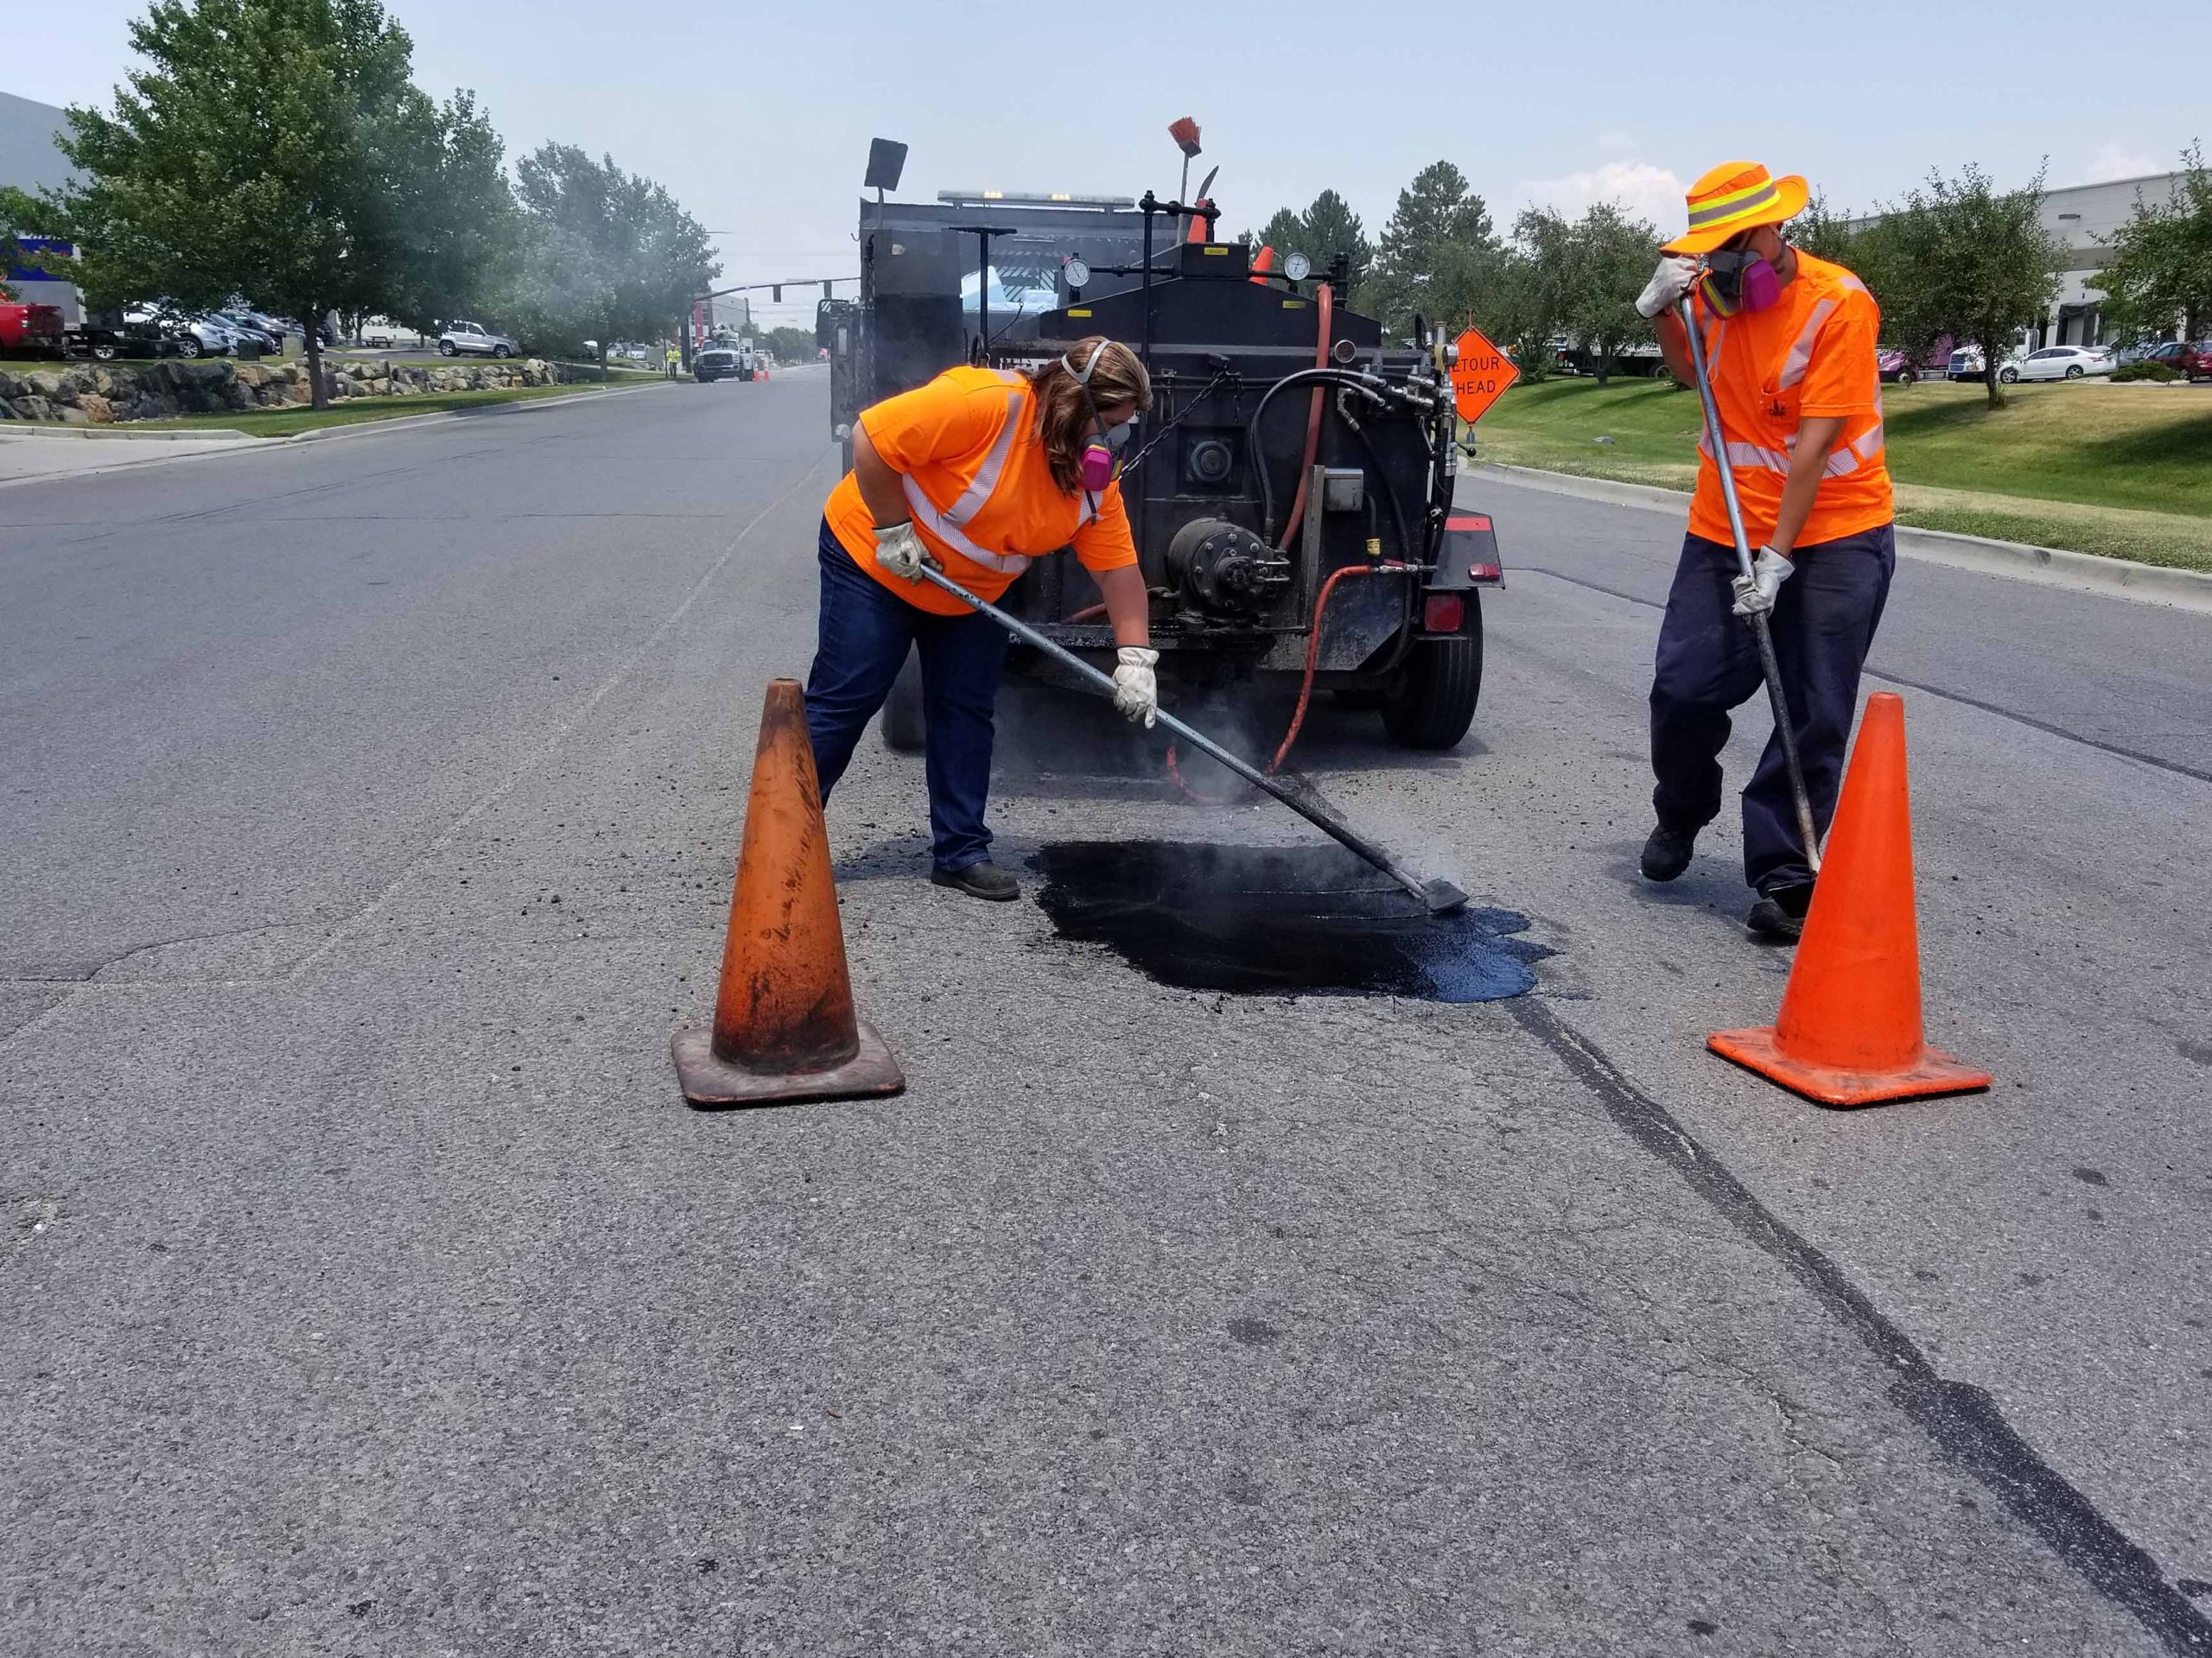 Two members of the Salt Lake City Streets Division repairing a pothole